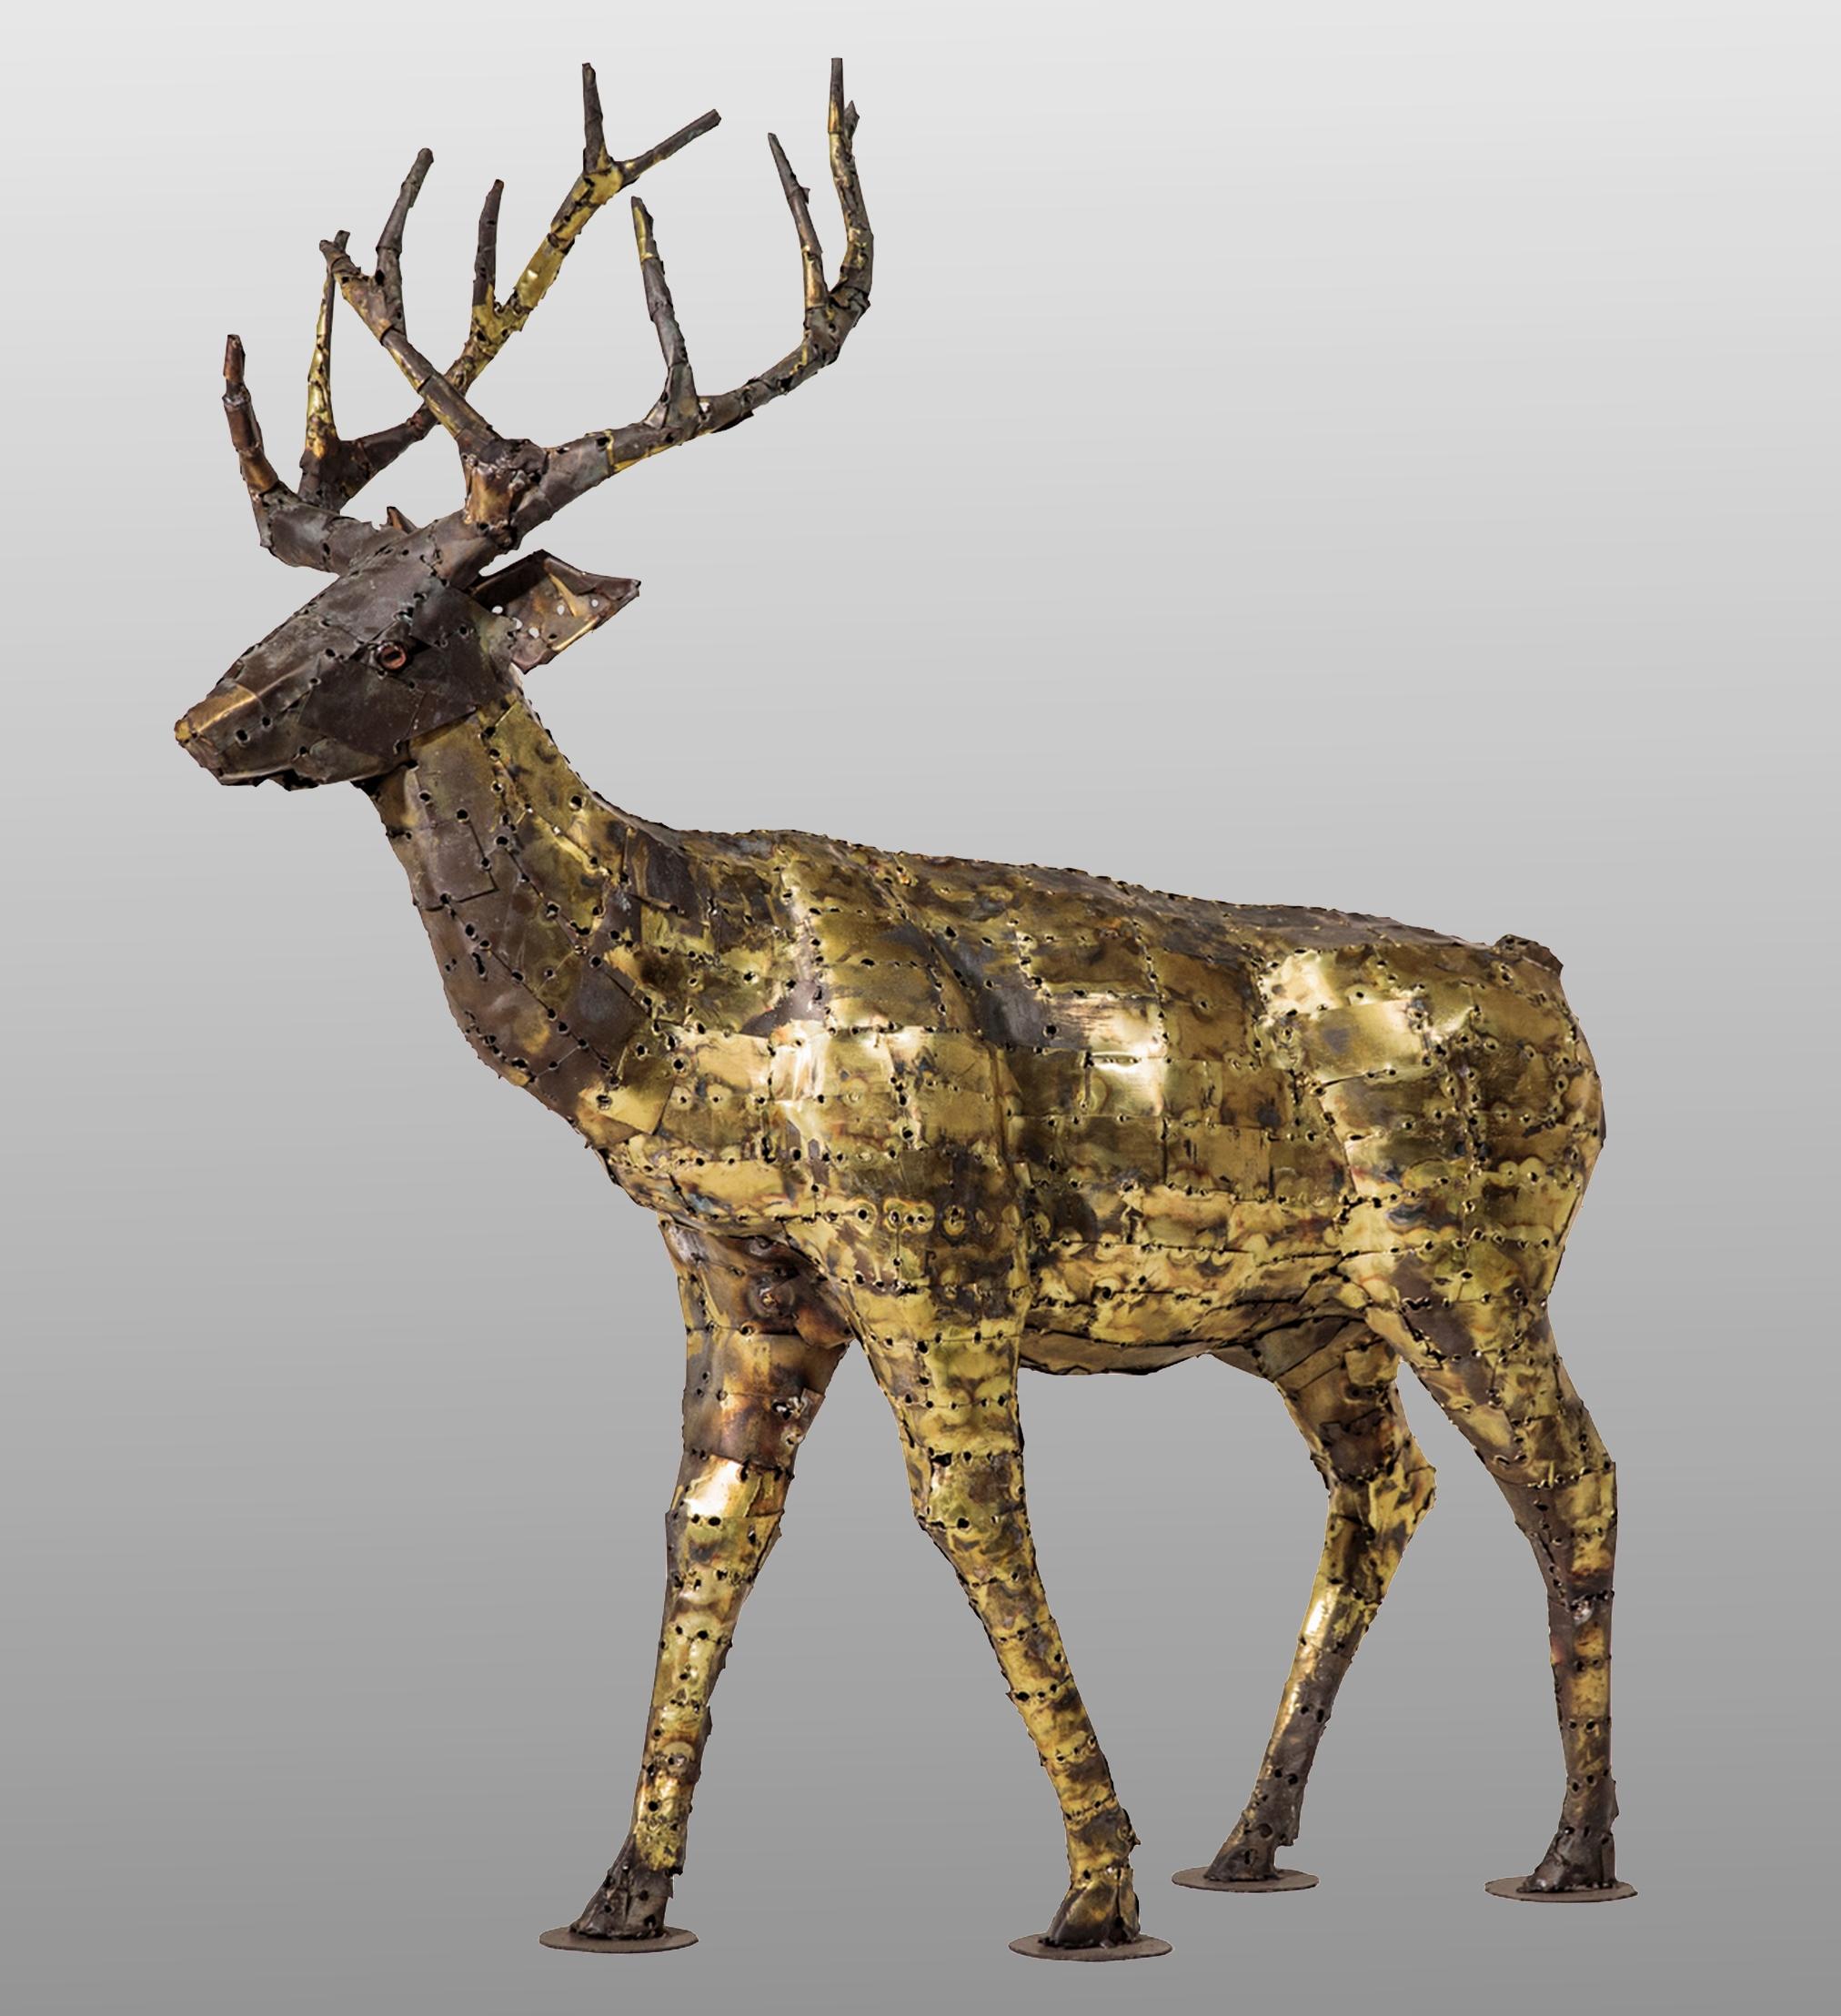 Deer, sculpture by François Melin, circa 1970,
made of small brass plates welded to an iron rod structure.
Can be used outdoors or indoors.
Unique piece.

Measures: Antlers width 19.69 in
Body width 15.75 in.